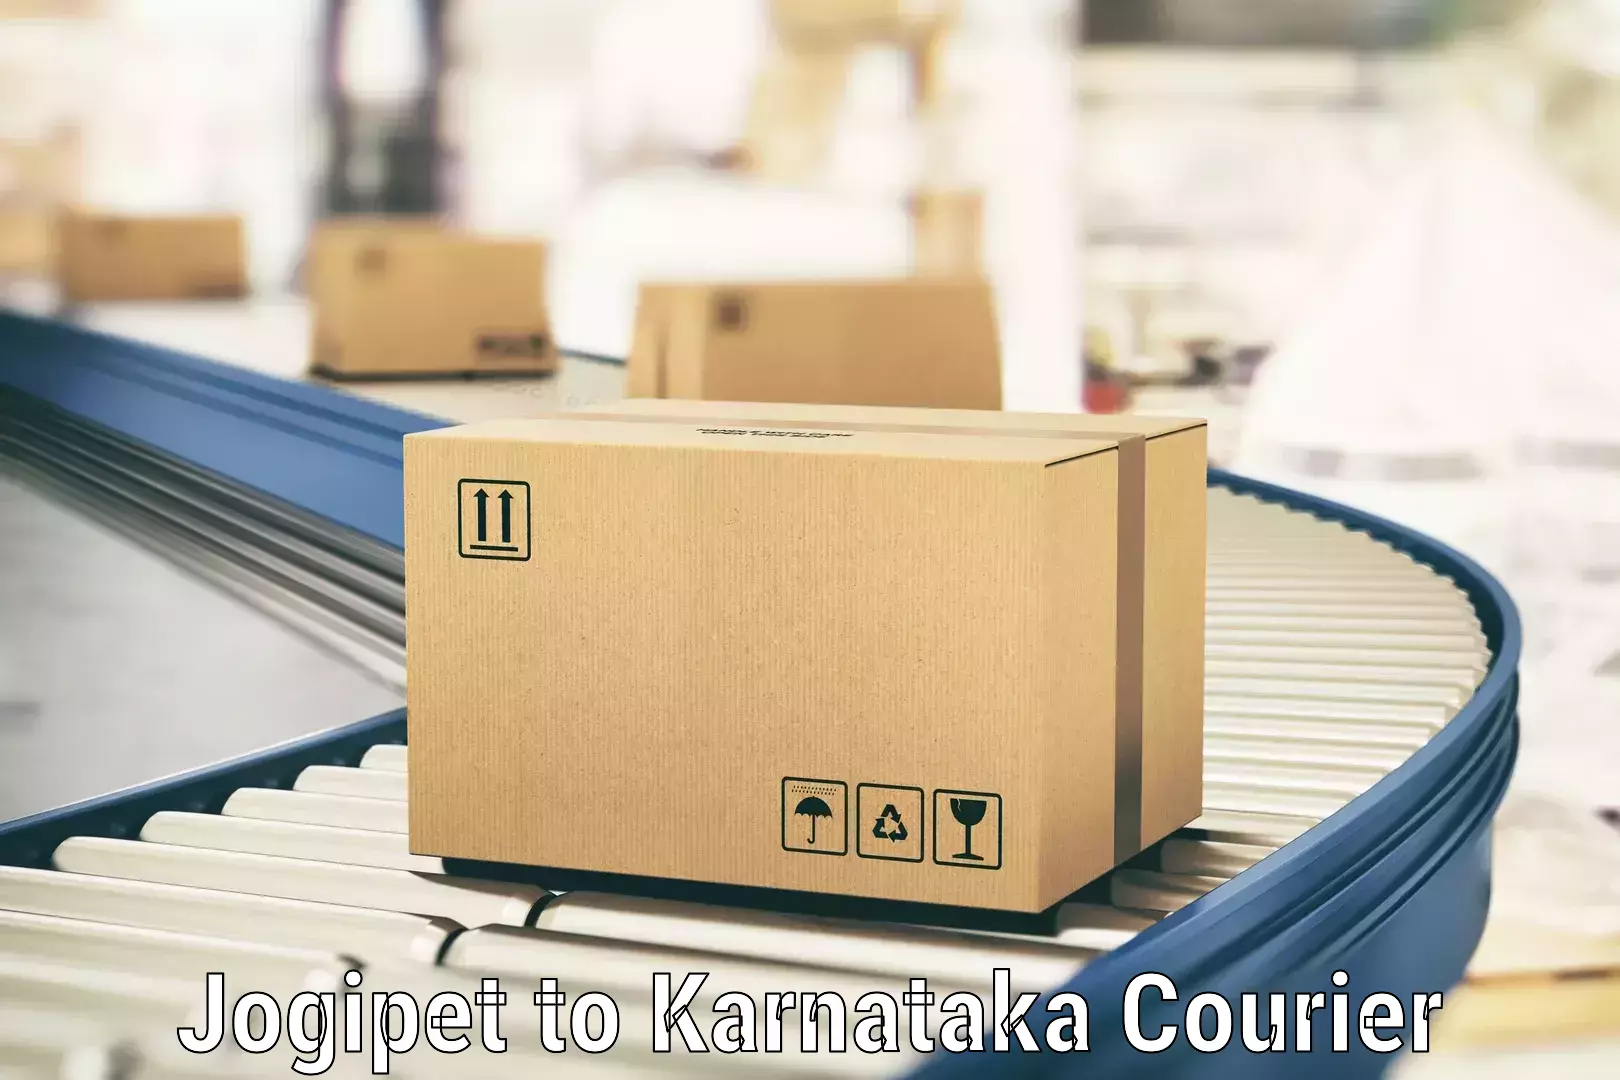 Special handling courier Jogipet to Jagalur